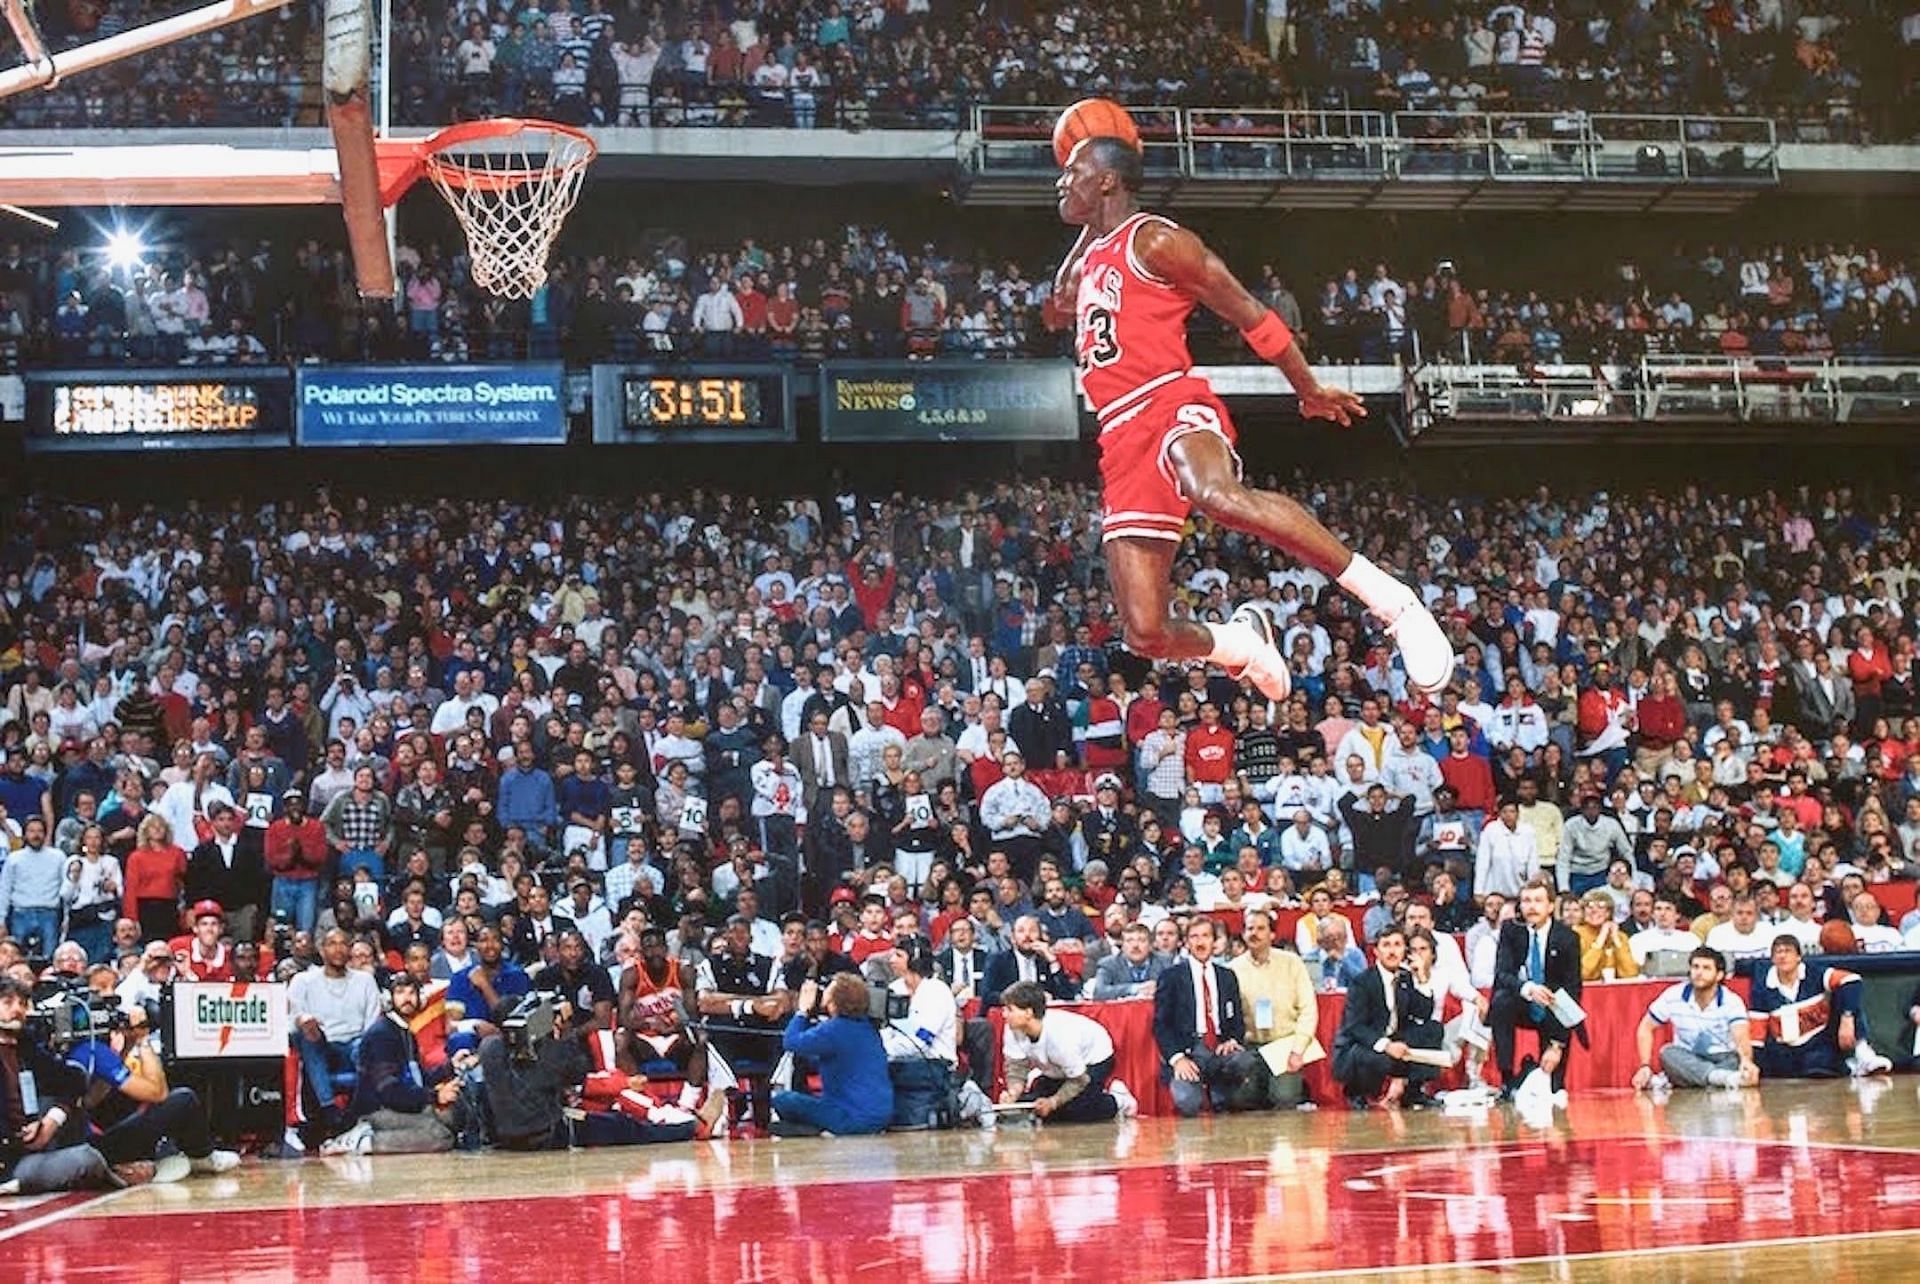 Watch Throwback to when Michael Jordan dominated the dunk contest